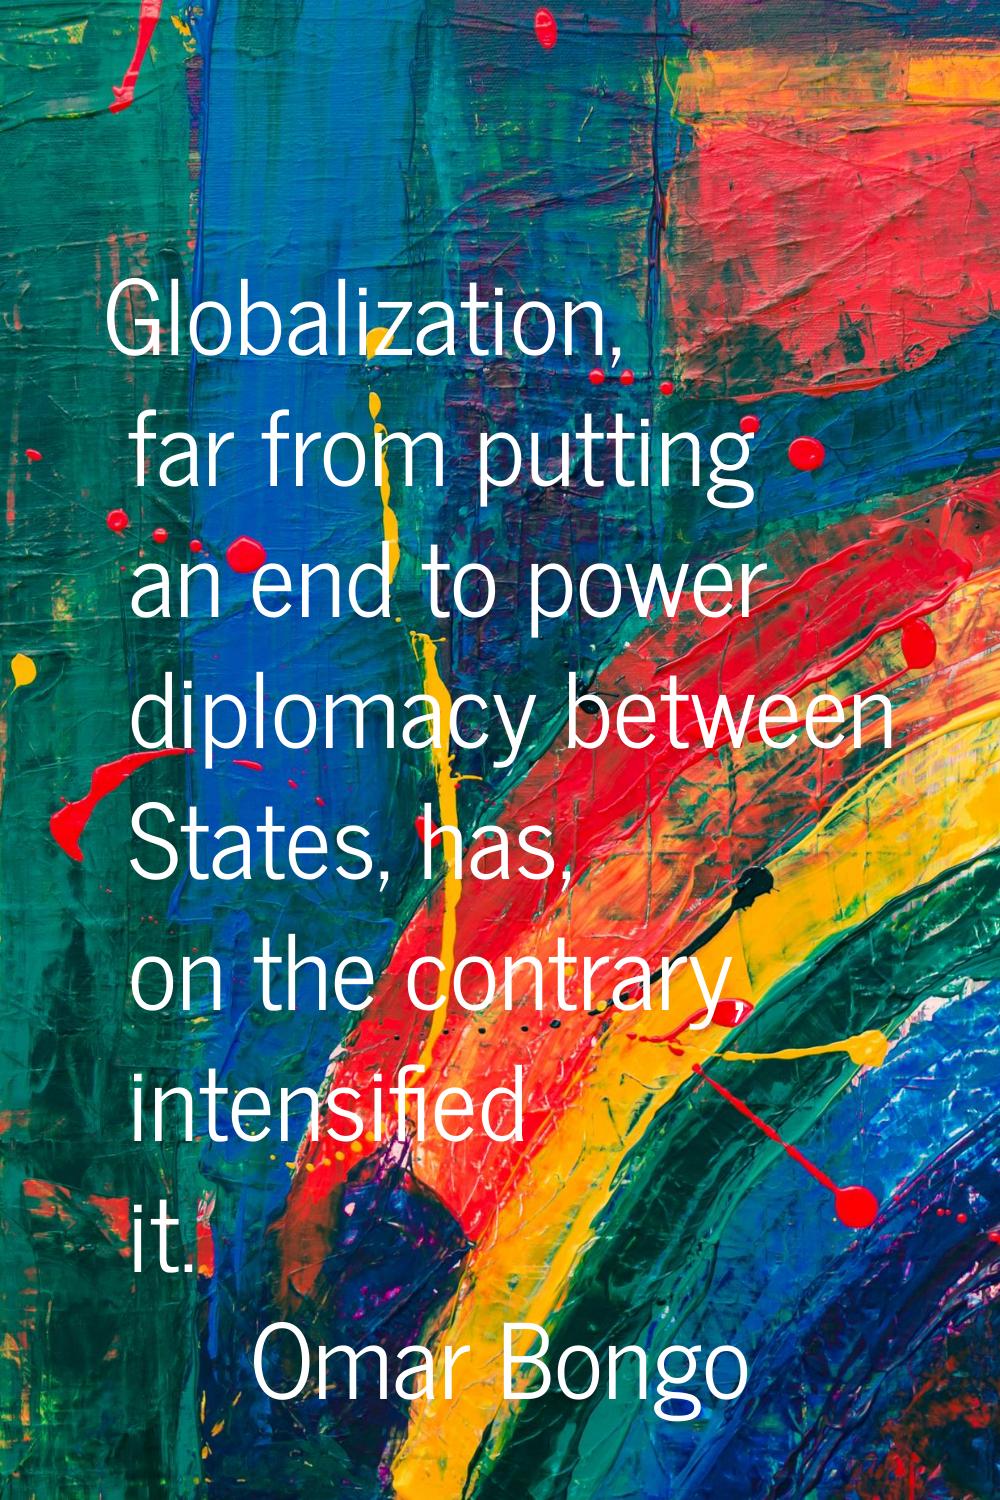 Globalization, far from putting an end to power diplomacy between States, has, on the contrary, int